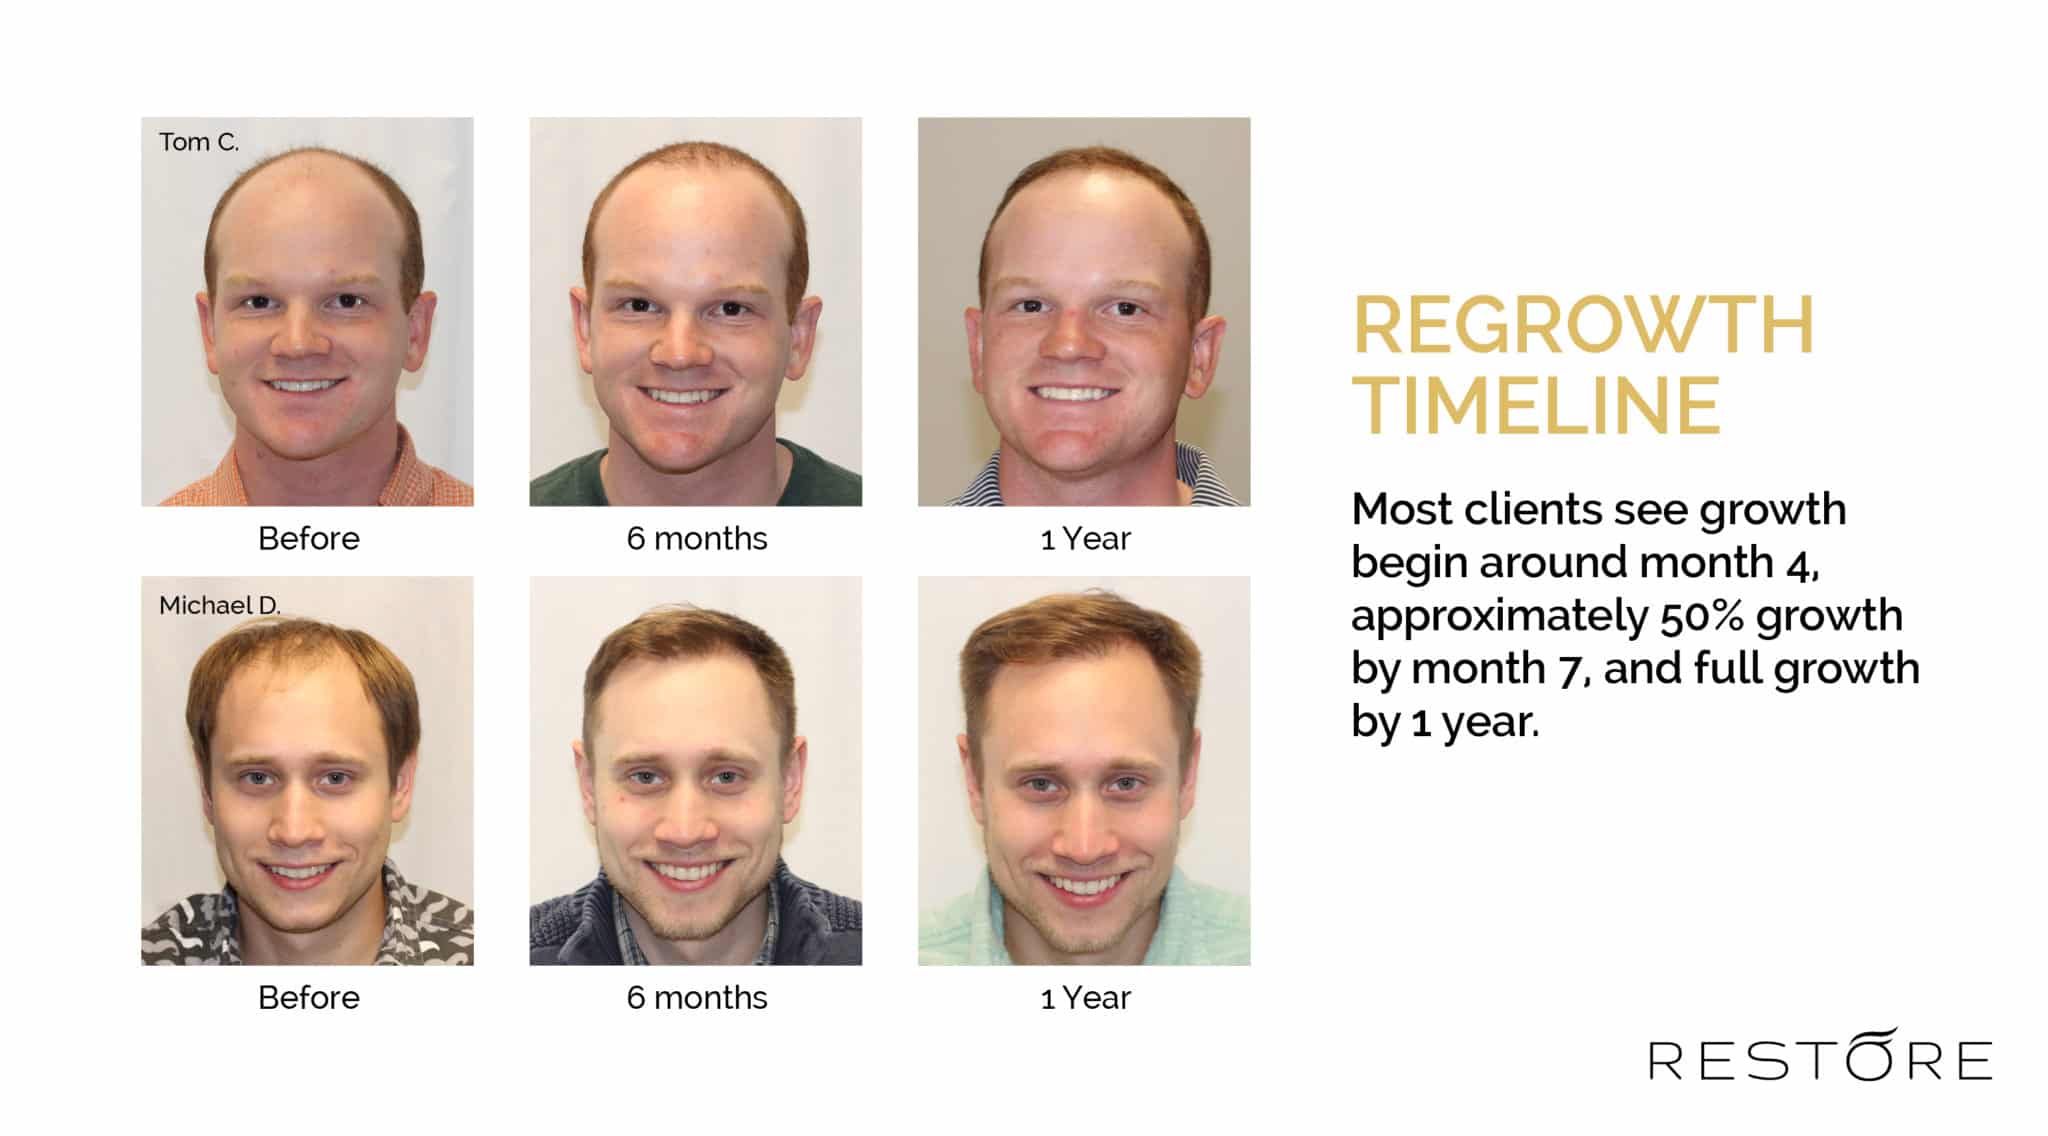 Regrowth Timeline - Most clients see growth begin around month 4, approximately 50% growth by month 7, and full growth by 1 year.